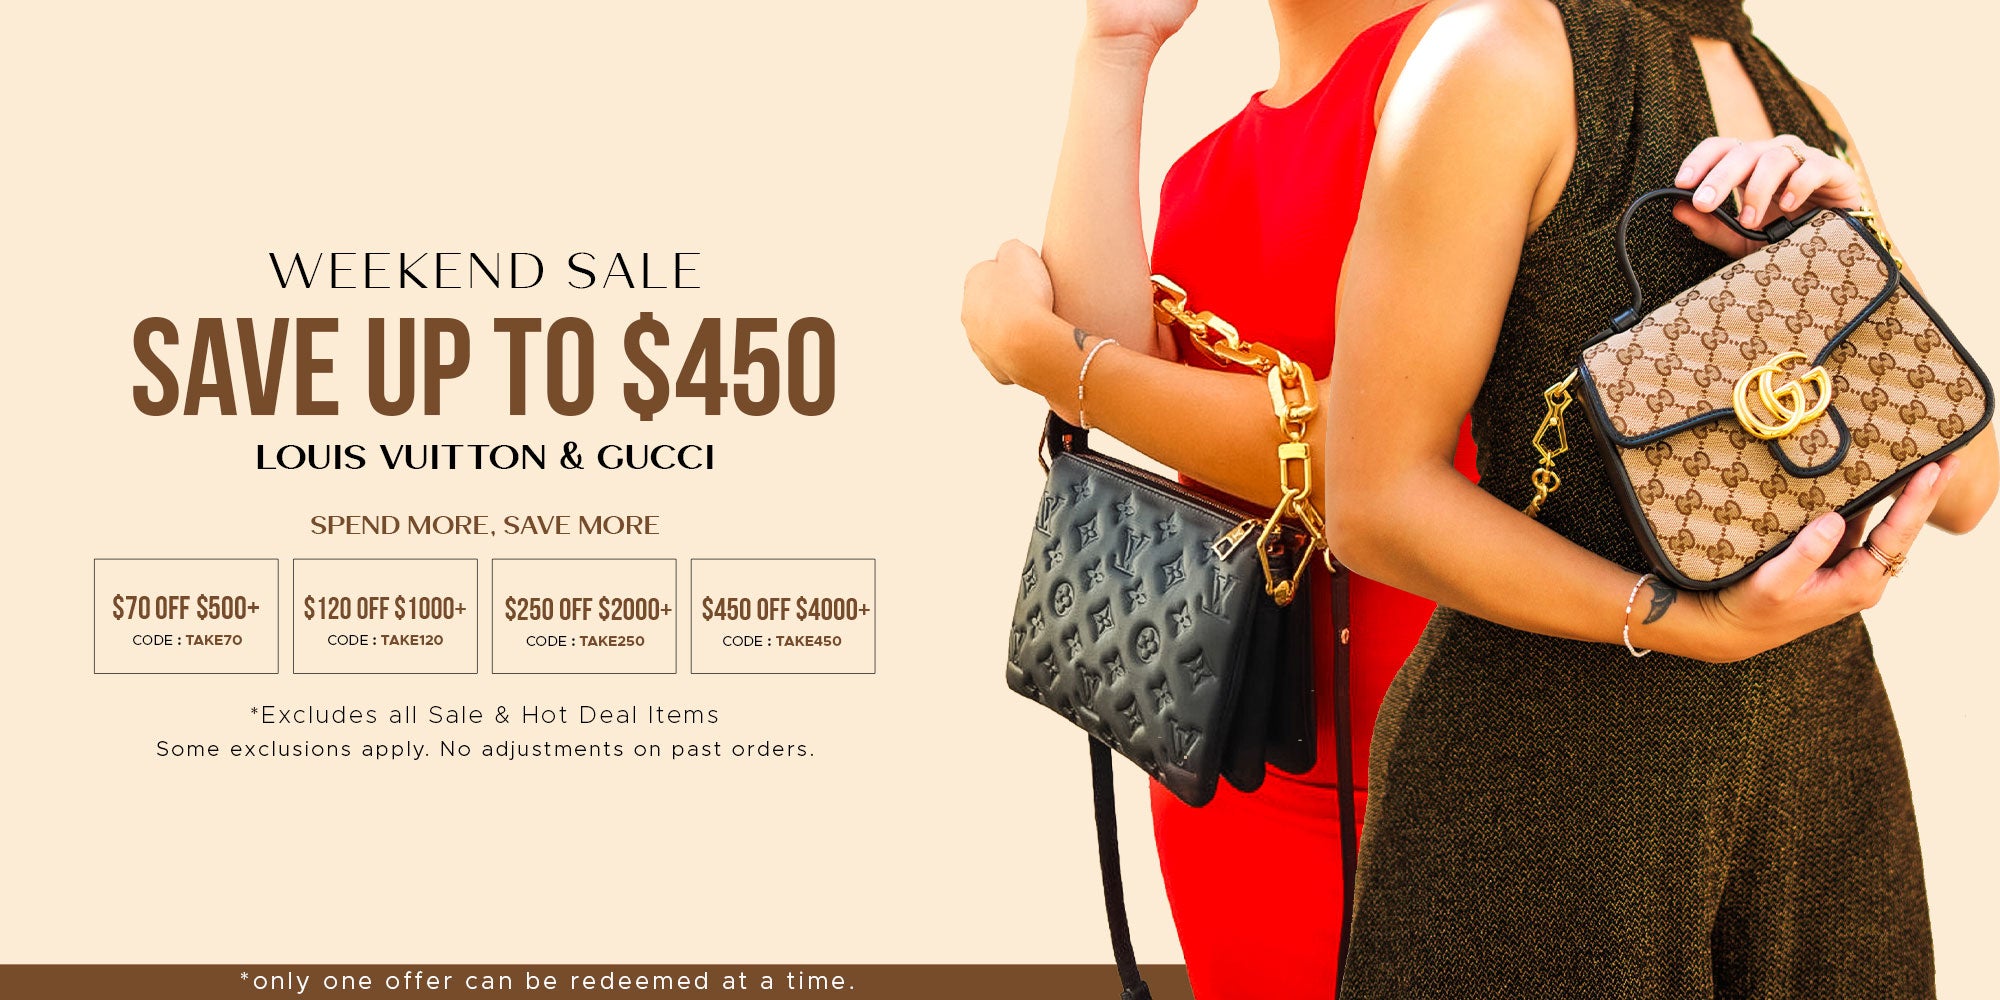 BLACK FRIDAY: OVER 500 LUXURY ITEMS FROM LOUIS VUITTON, GUCCI